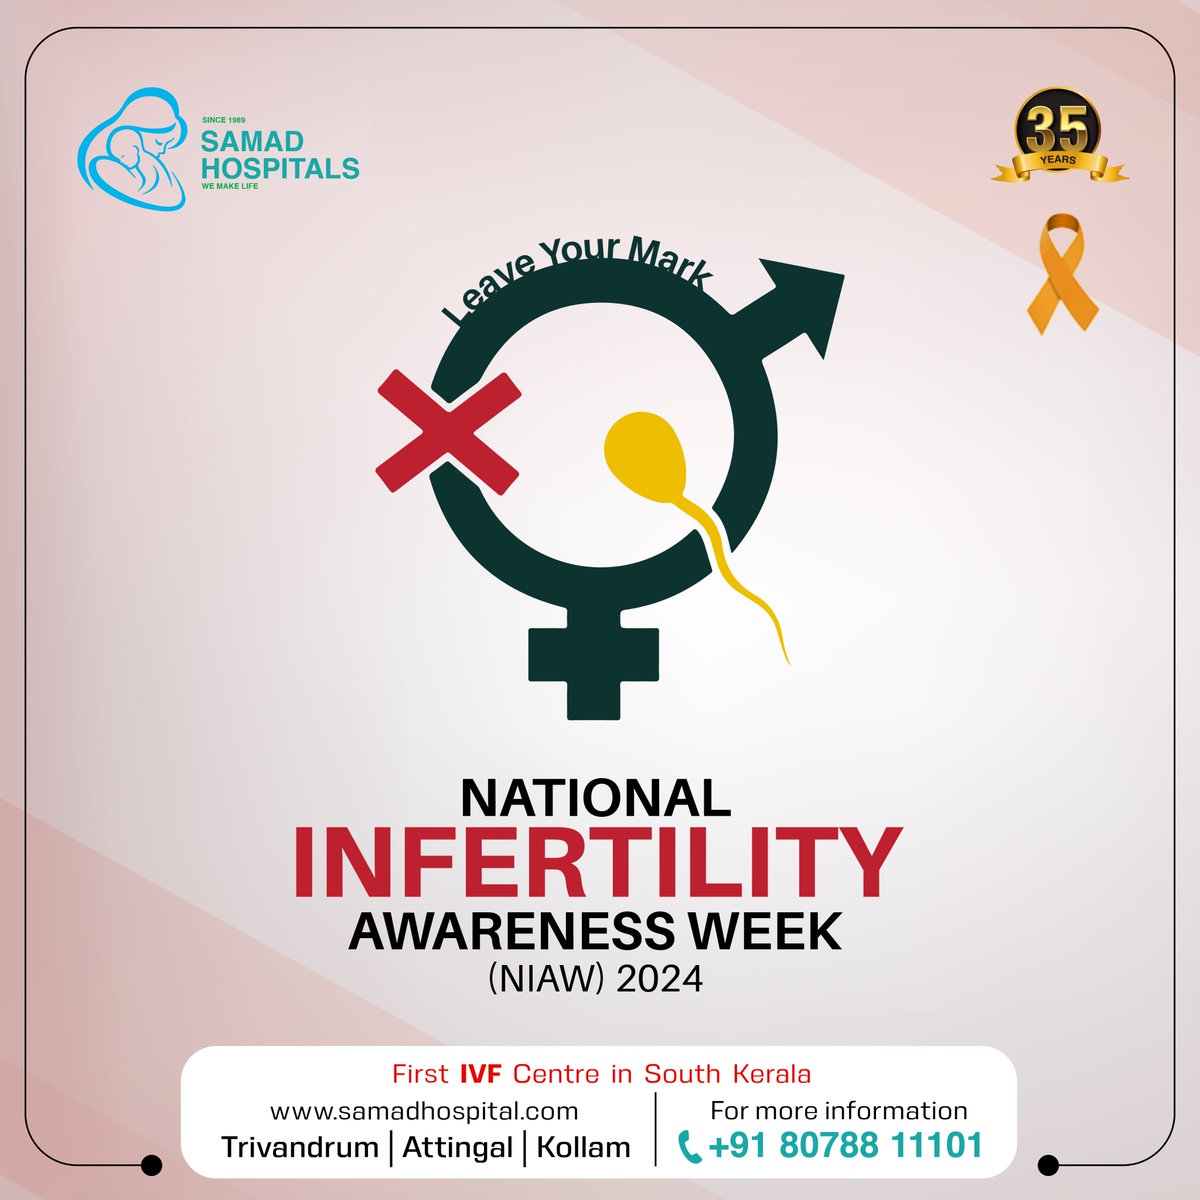 This #NationalInfertilityAwarenessWeek, Samad Hospital joins the fight against stigma and shines a light on infertility.
1 in 6 couples experience infertility, and you're not alone. We offer comprehensive care and support to help build your family.
#samadhospital #infertility